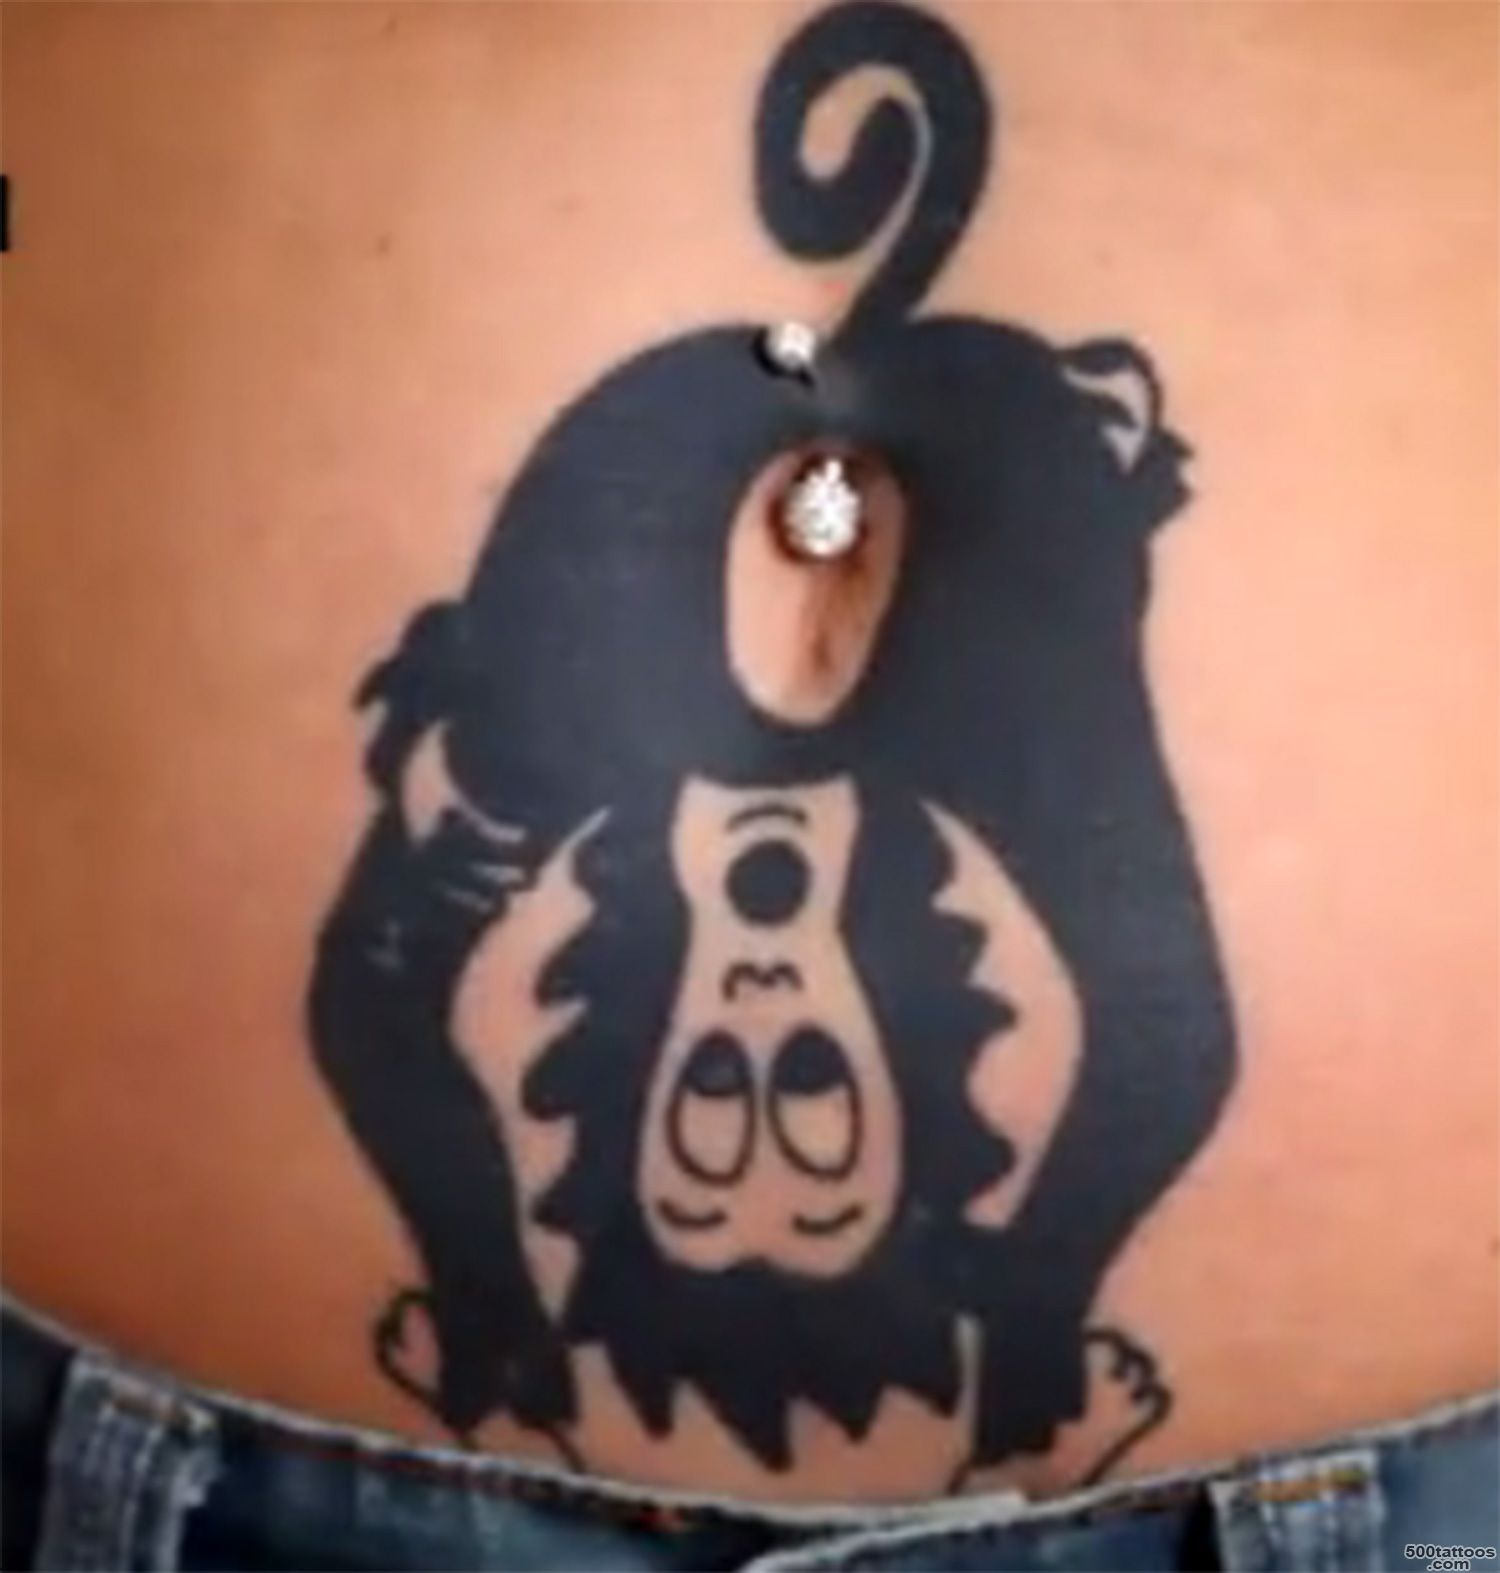 Driving me ape … Woman#39s belly button monkey tattoo is butt of ..._38